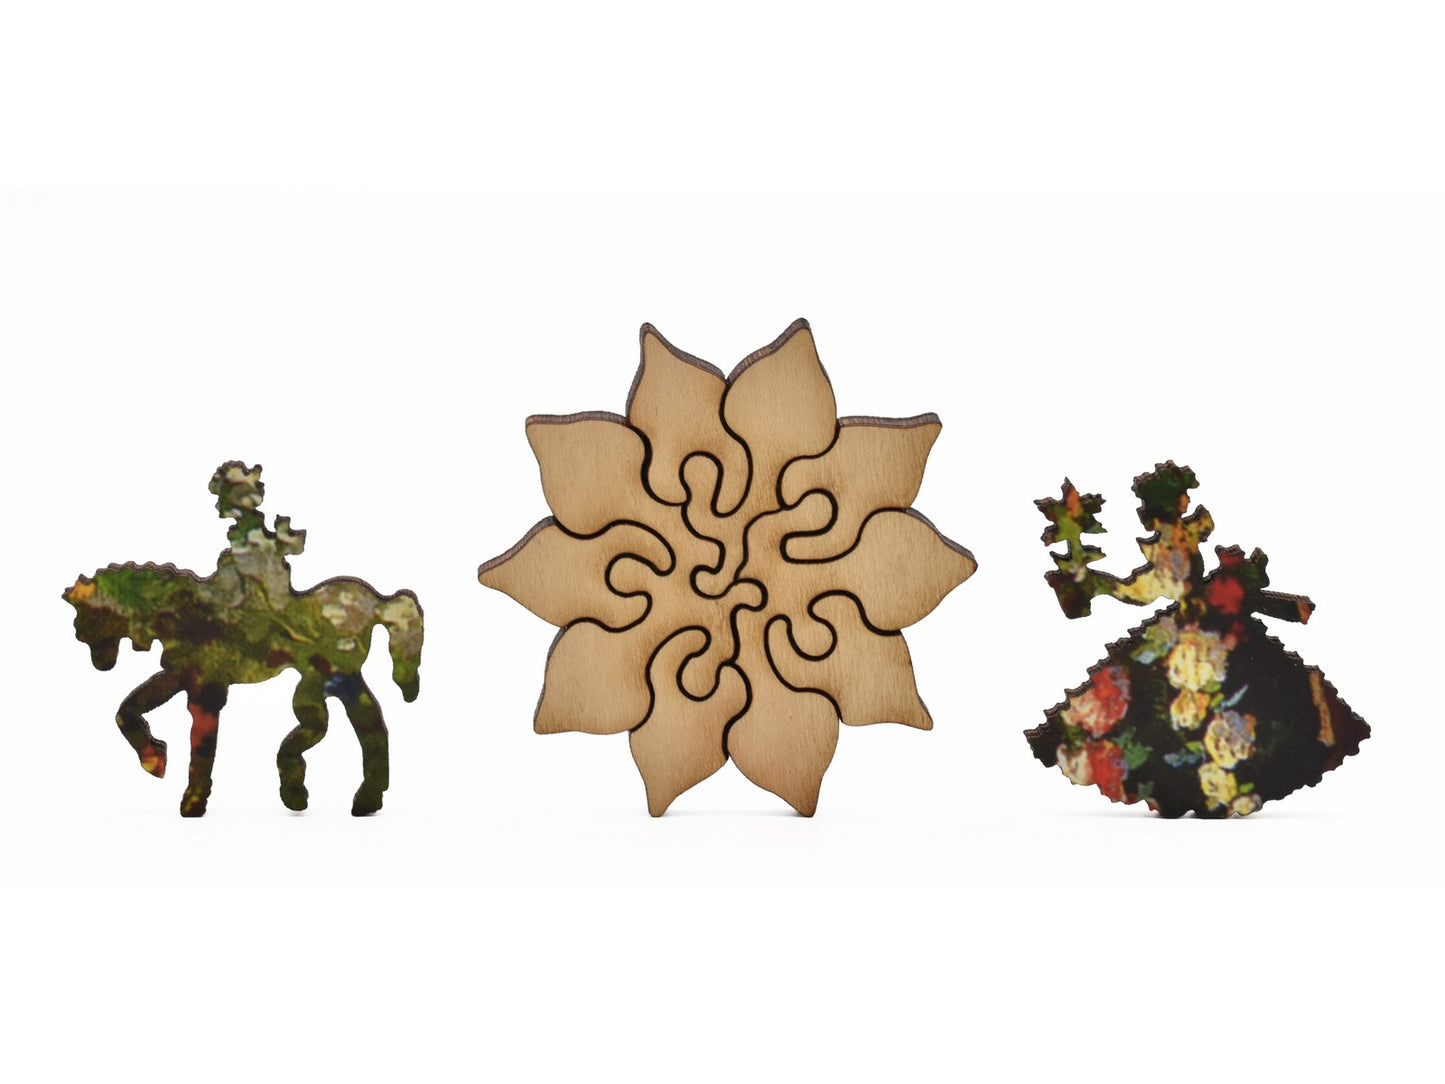 A closeup of pieces in the shape of a flower, a person riding a horse, and a person holding a flower.